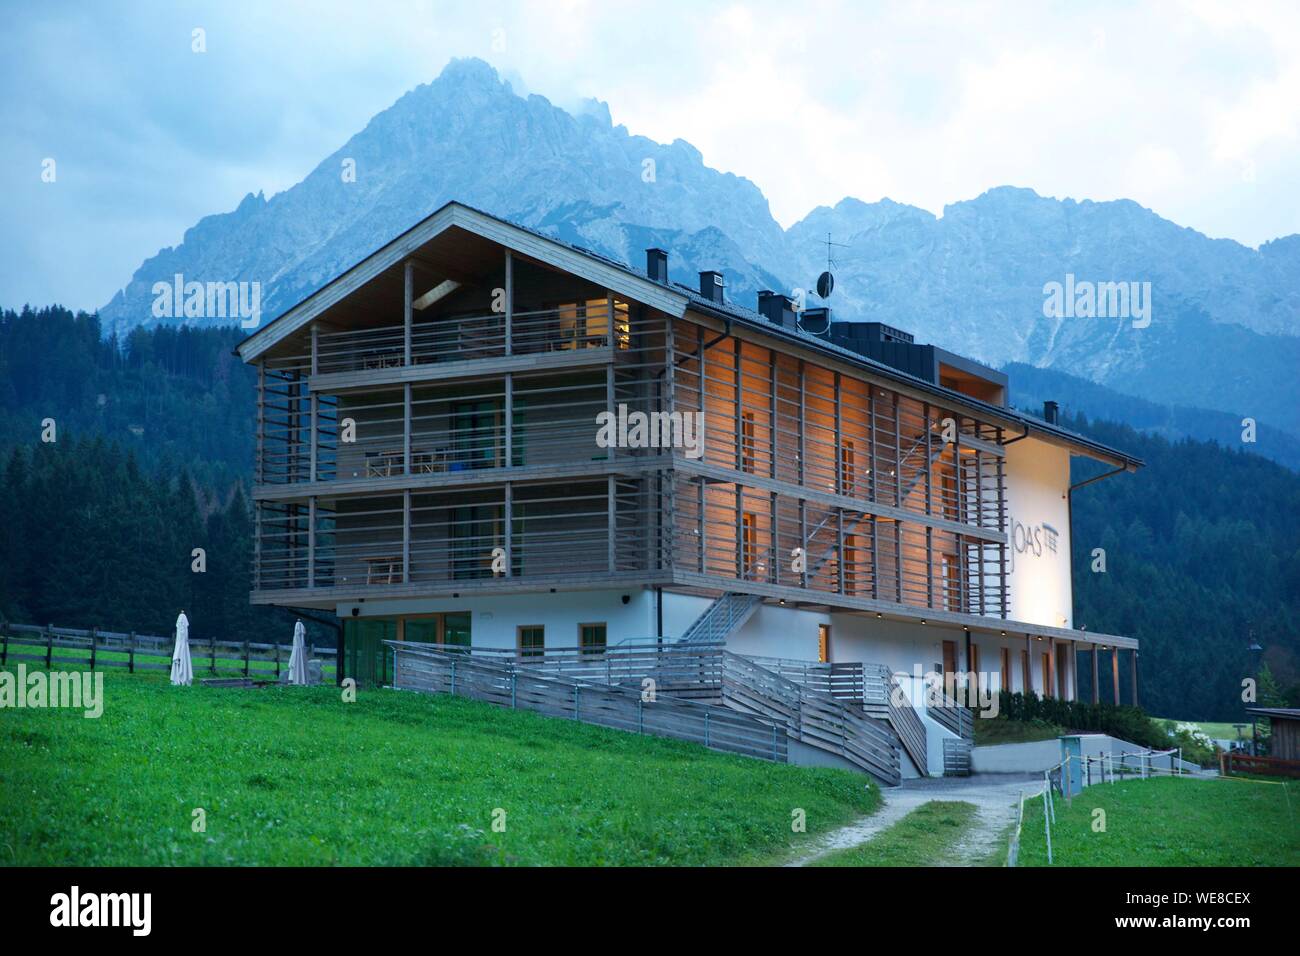 Italy, autonomous province of Bolzano, San Candido, joas hotel posed on pastures at the foot of the Dolomites mountains Stock Photo